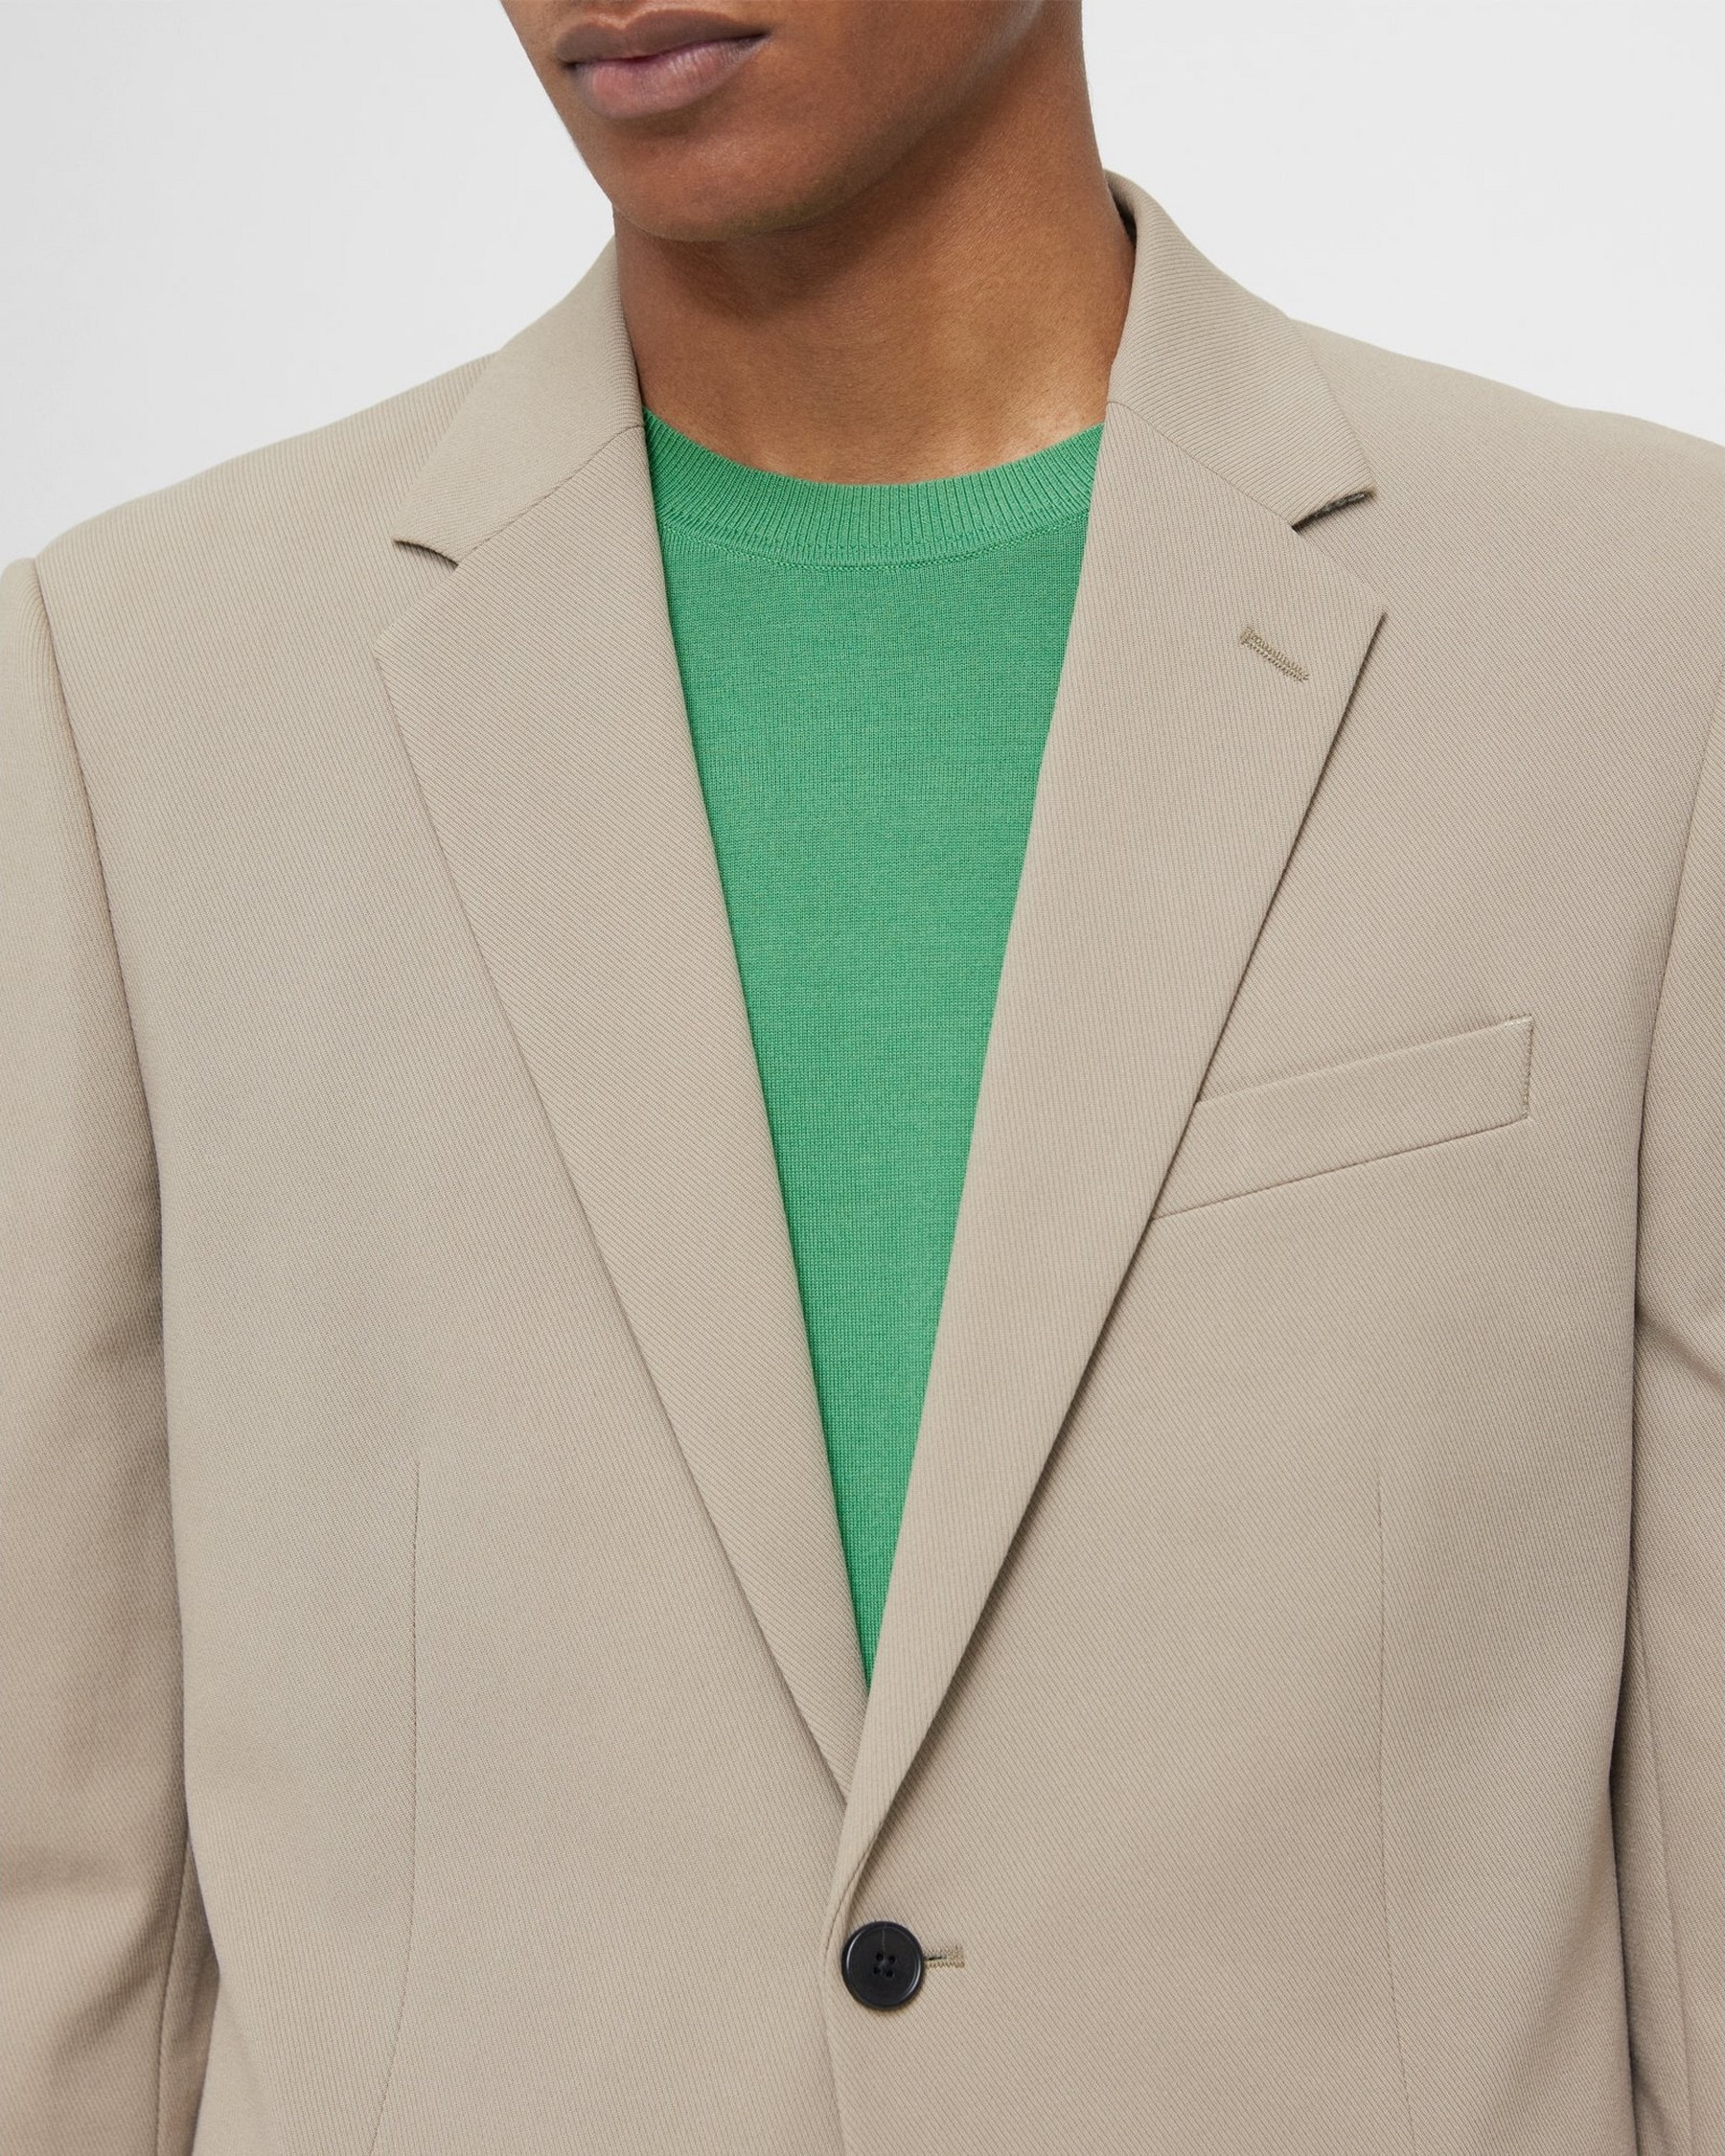 Chambers Blazer in Neoteric Twill